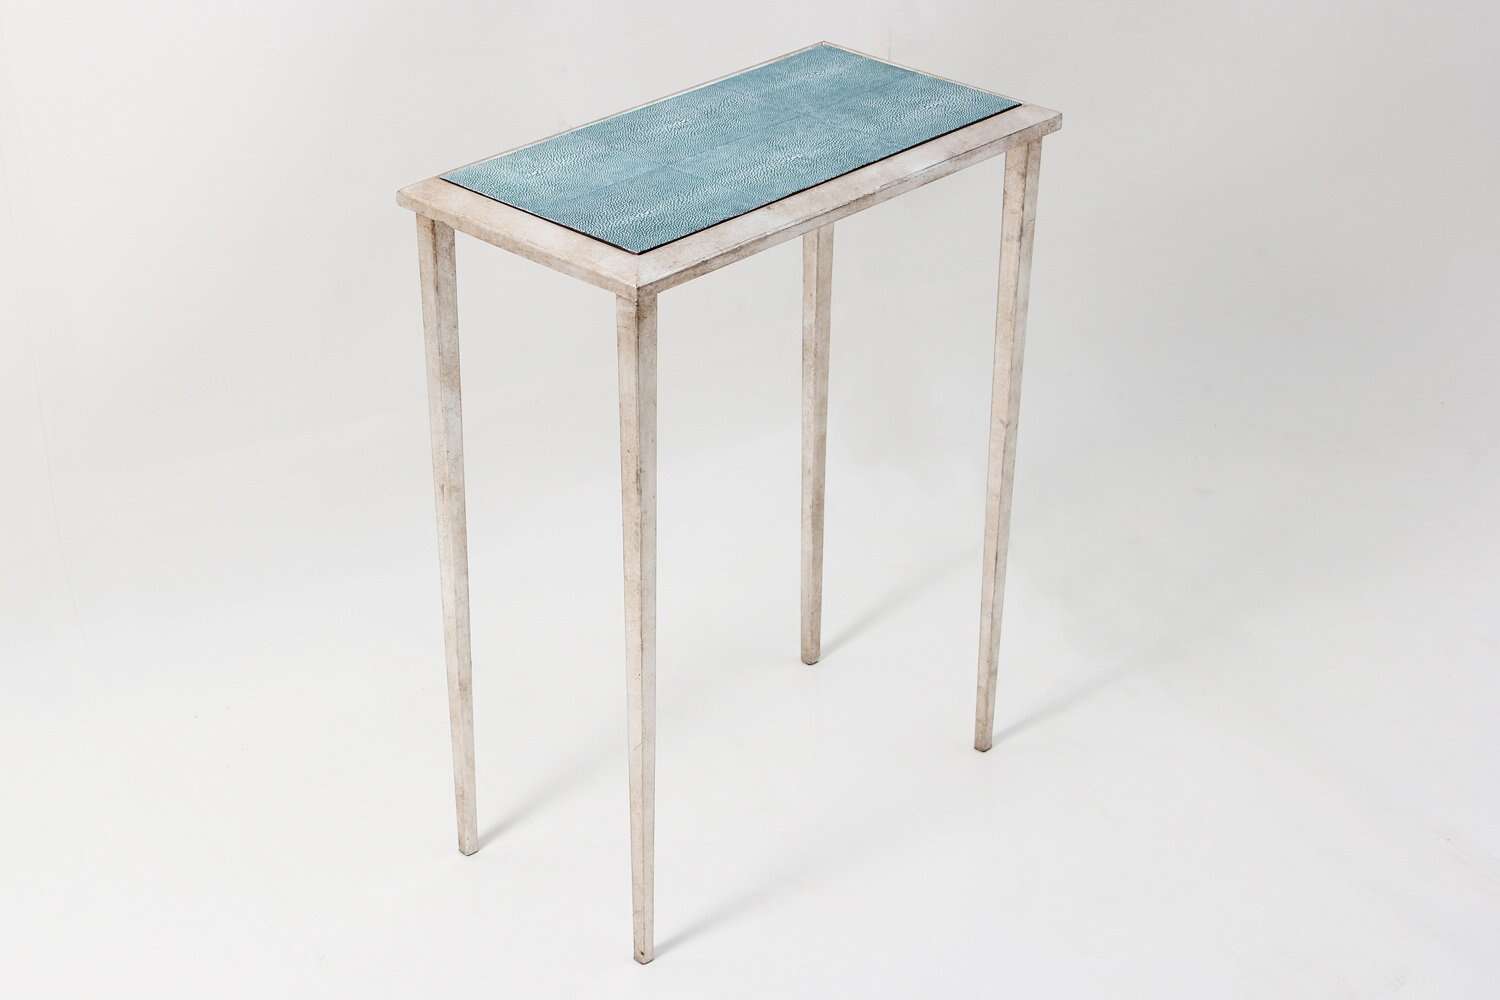 lamp table Narrow side table Teal shagreen lamp table